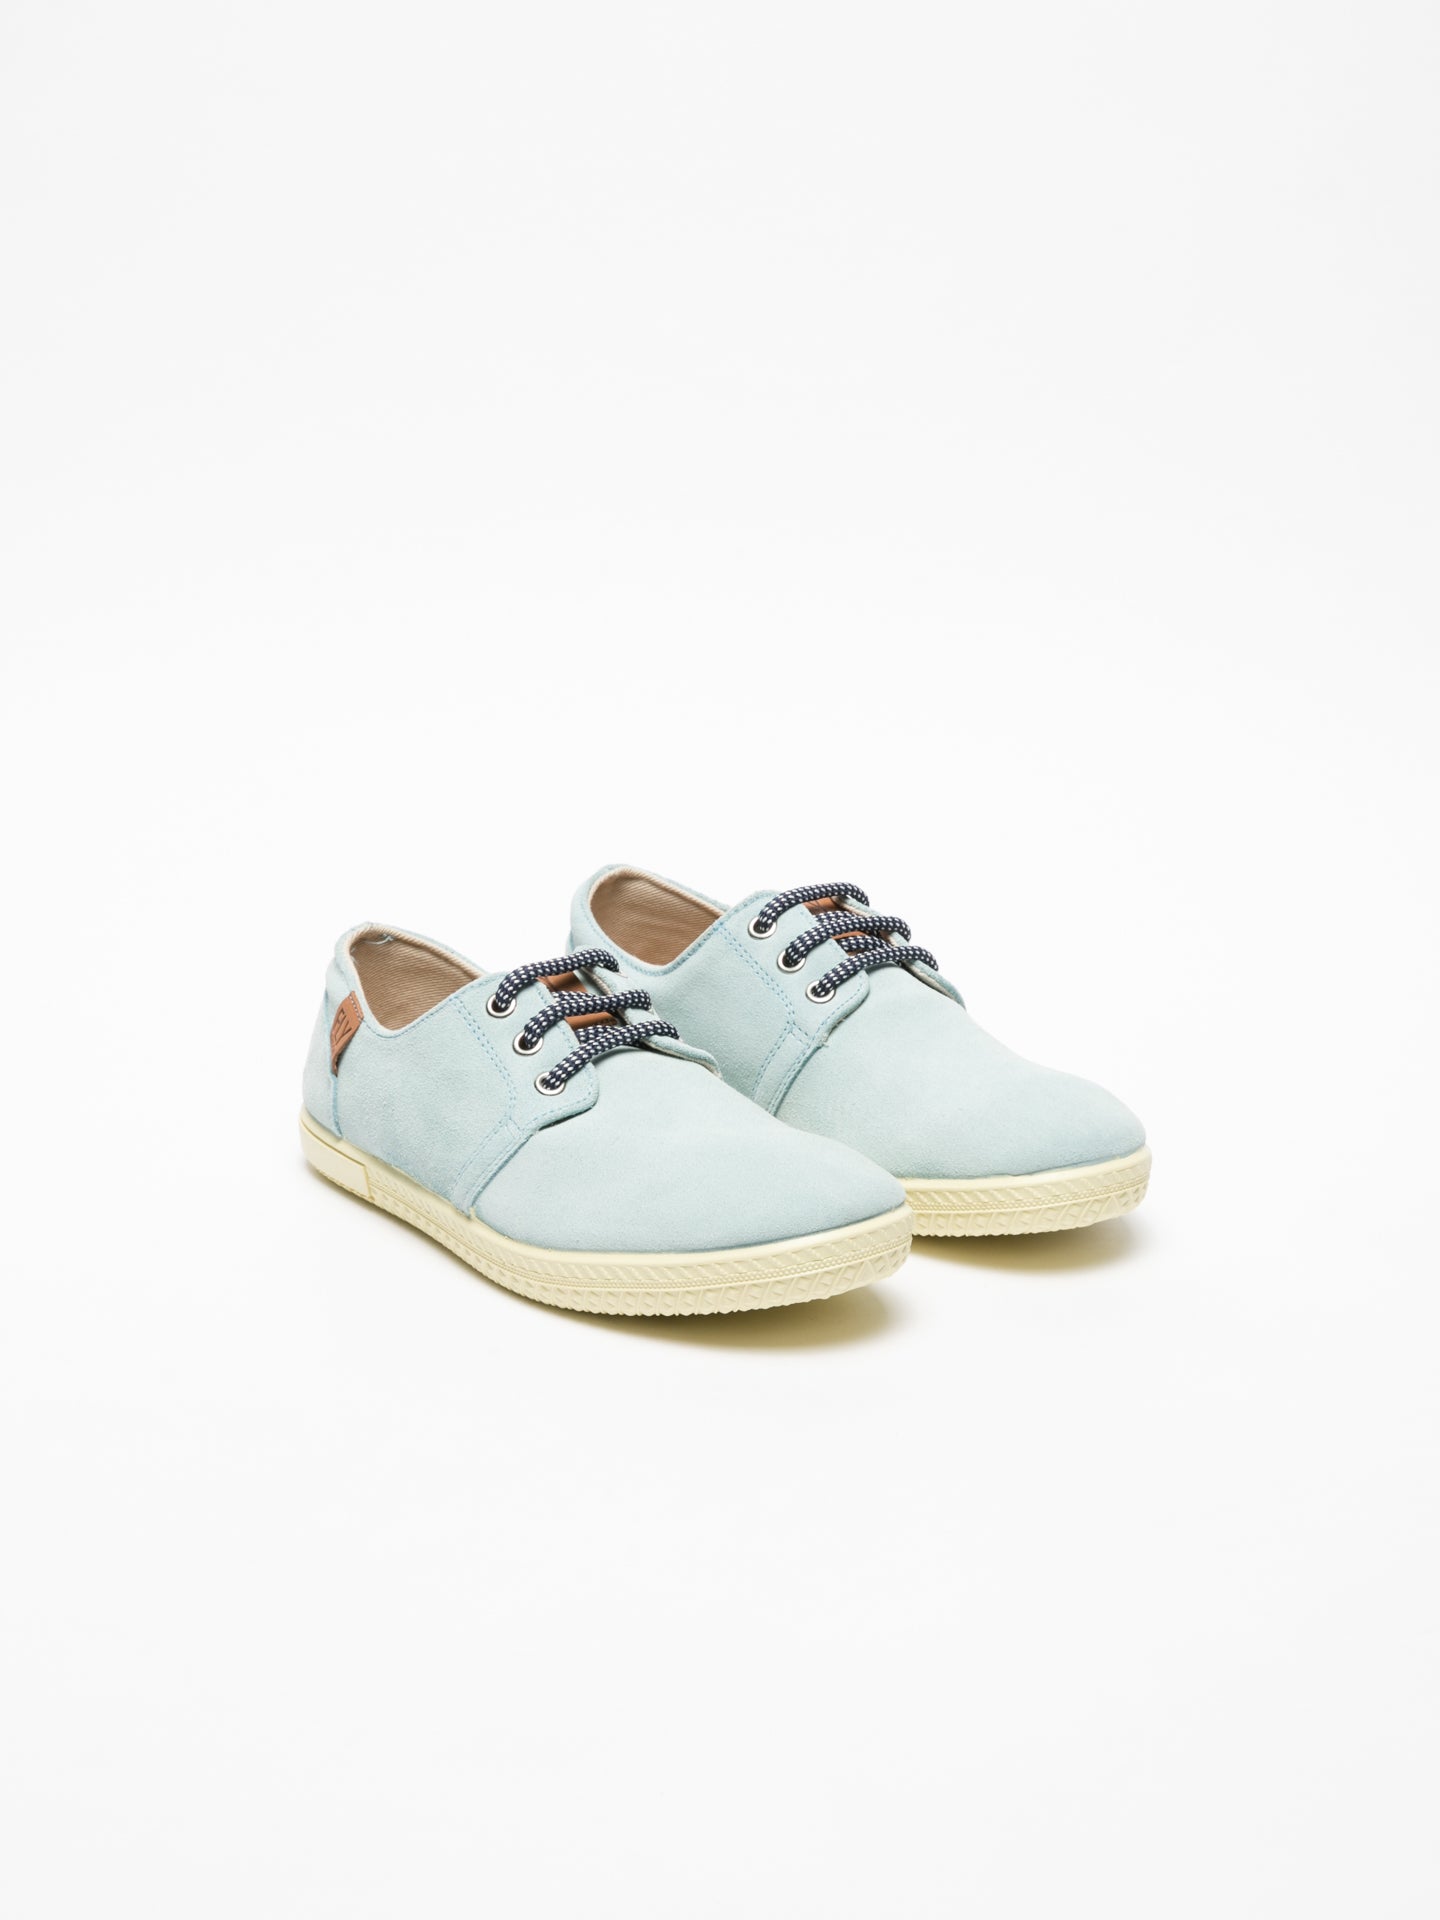 Fly London LightBlue Lace-up Trainers